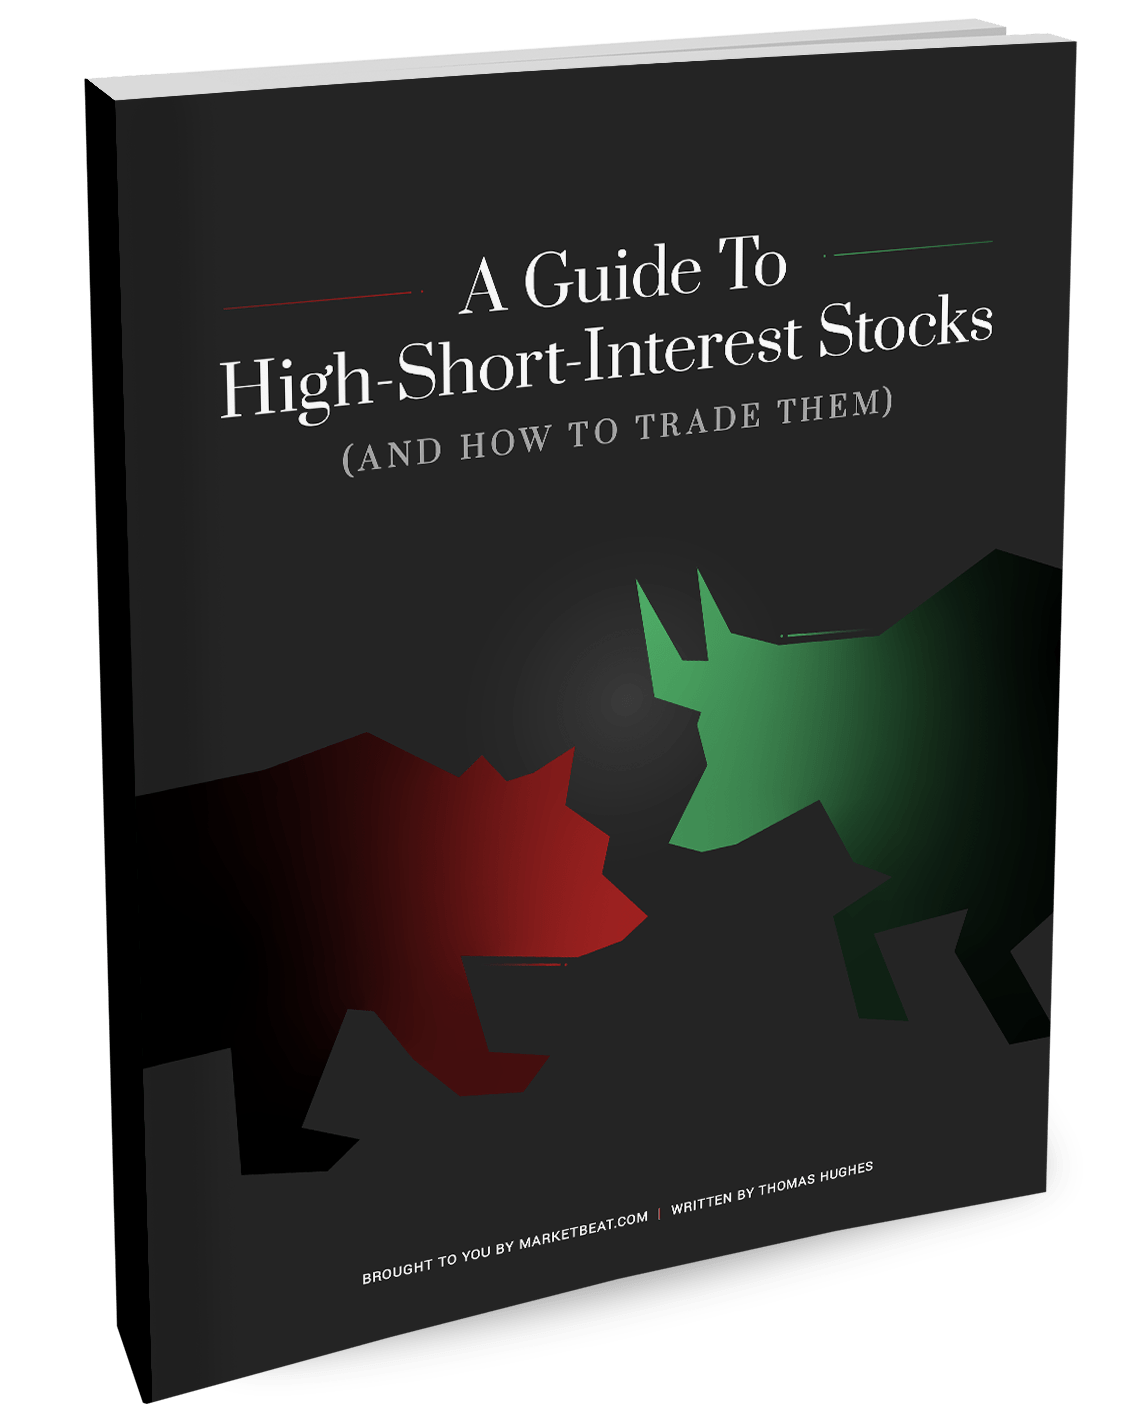 A Guide to Hedging High Interest Stocks